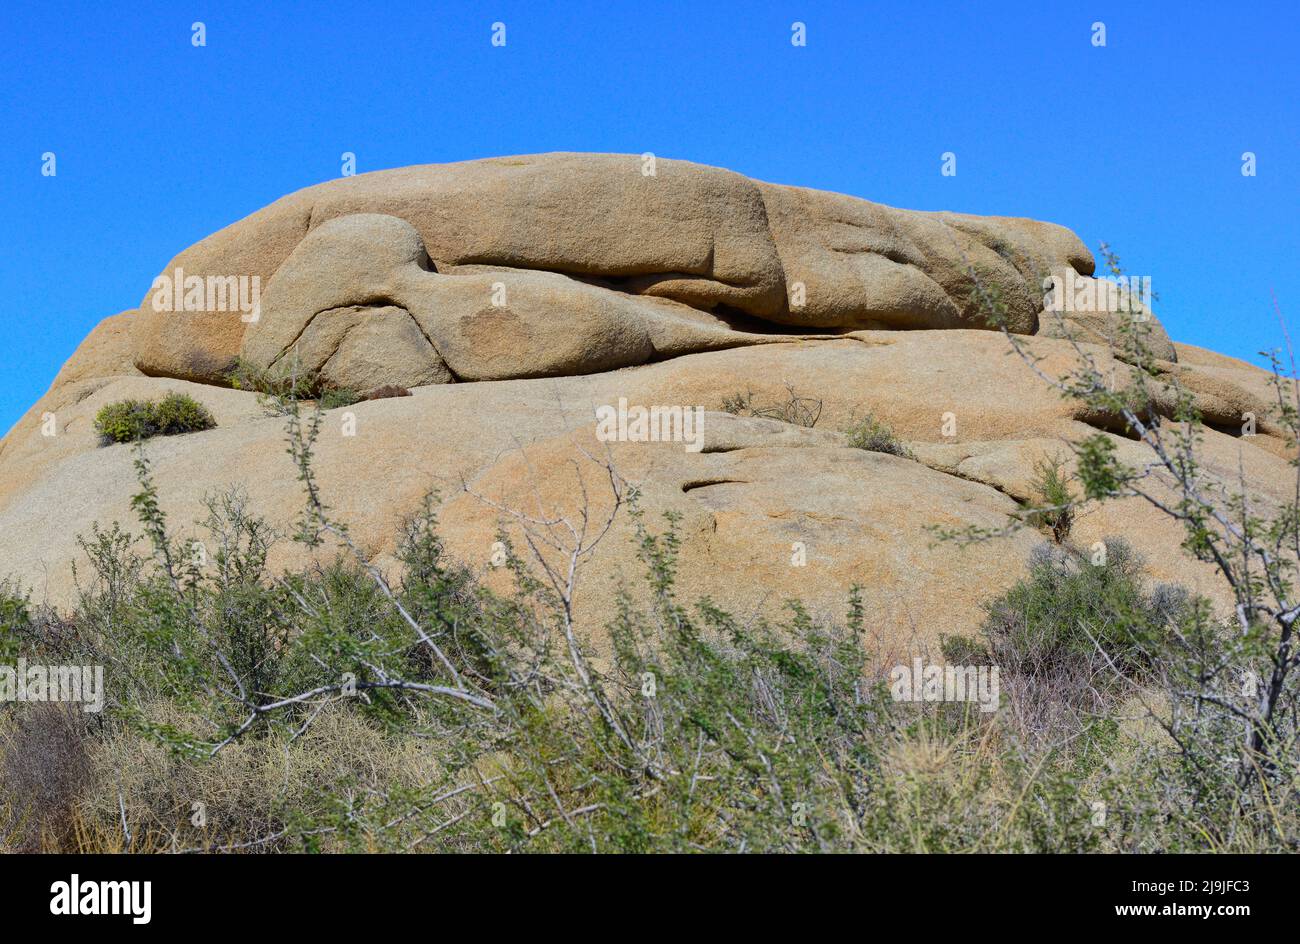 The unique boulders created by plate tectonics and erosion and unique vegetation in the Joshua Tree National Park, in the Mojave desert, CA Stock Photo